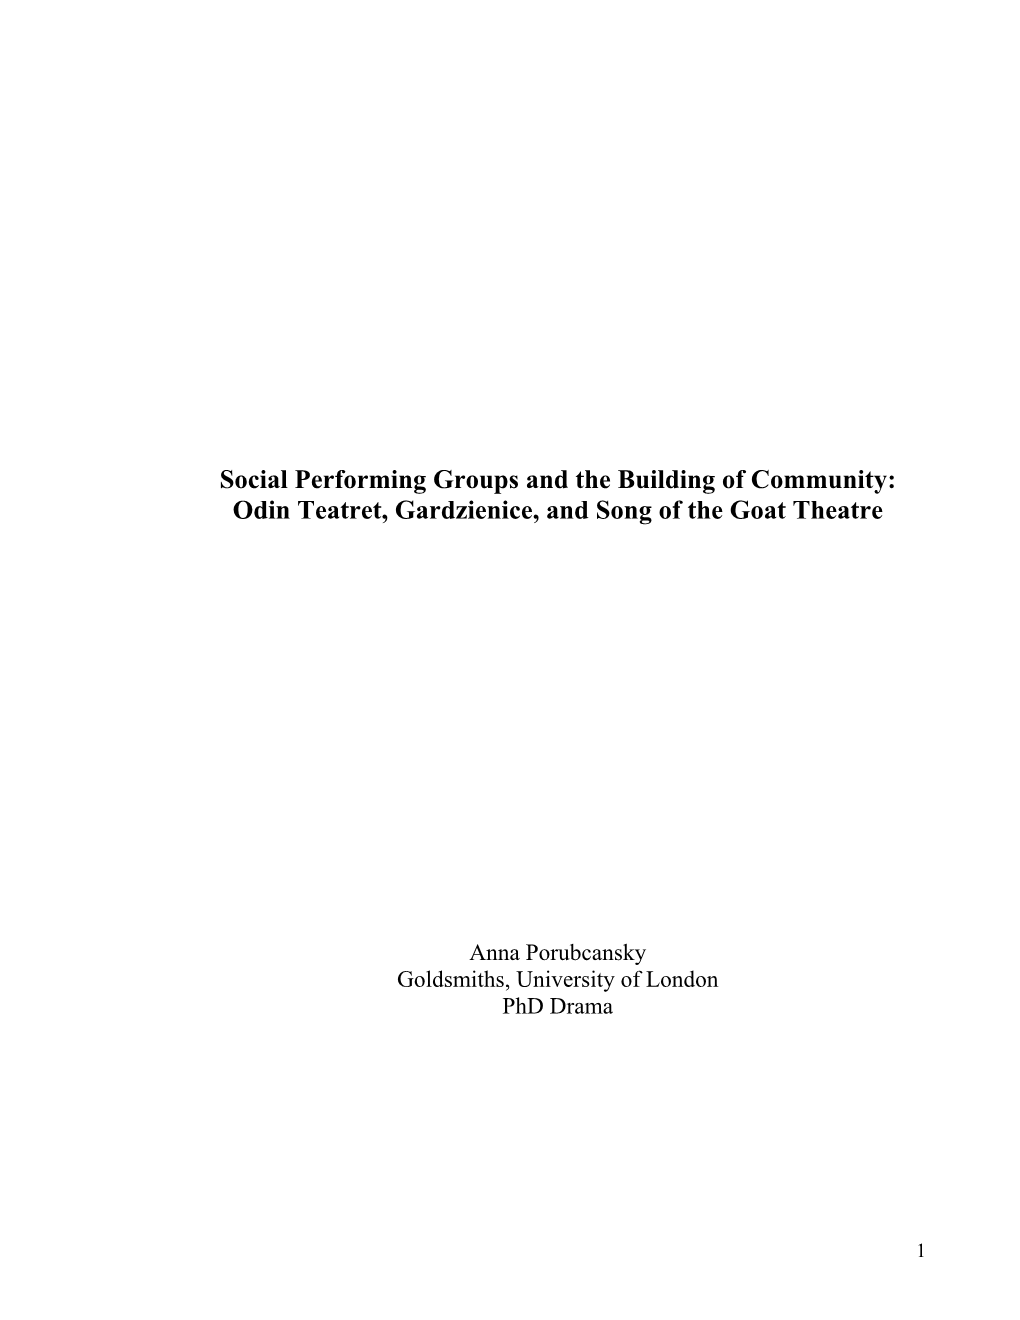 Social Performing Groups and the Building of Community: Odin Teatret, Gardzienice, and Song of the Goat Theatre